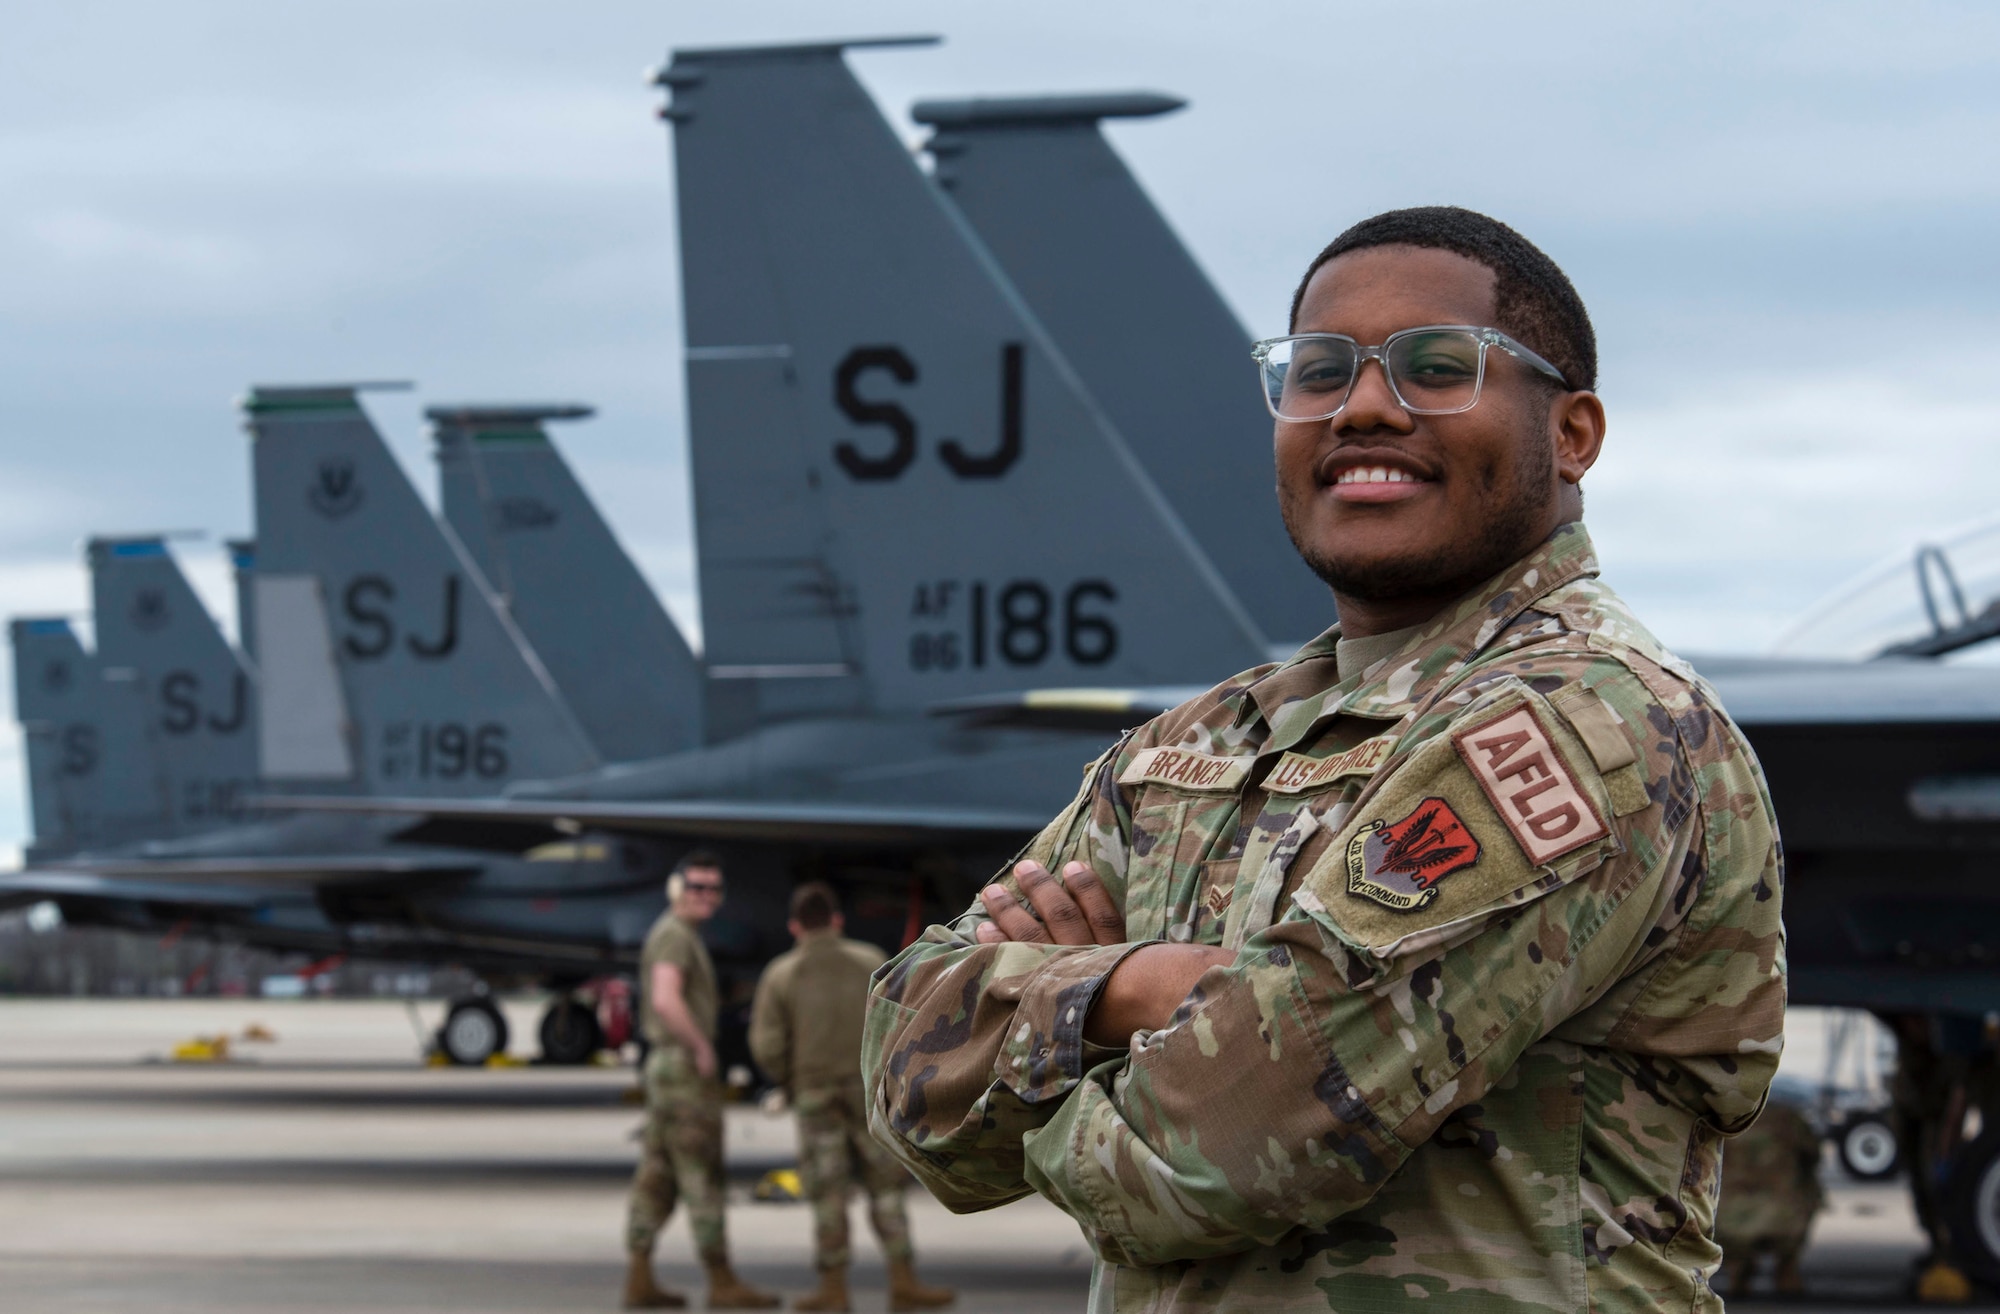 Senior Airman Dashaun Branch, 4th Operations Support Squadron airfield management shift lead, poses for a photo at Seymour Johnson Air Force Base, North Carolina, March 17, 2022. Branch was recognized by his supervisor for his excellent work ethic, positive attitude and for always going above and beyond to complete the mission. (U.S Air Force photo by Airman 1st Class Sabrina Fuller)